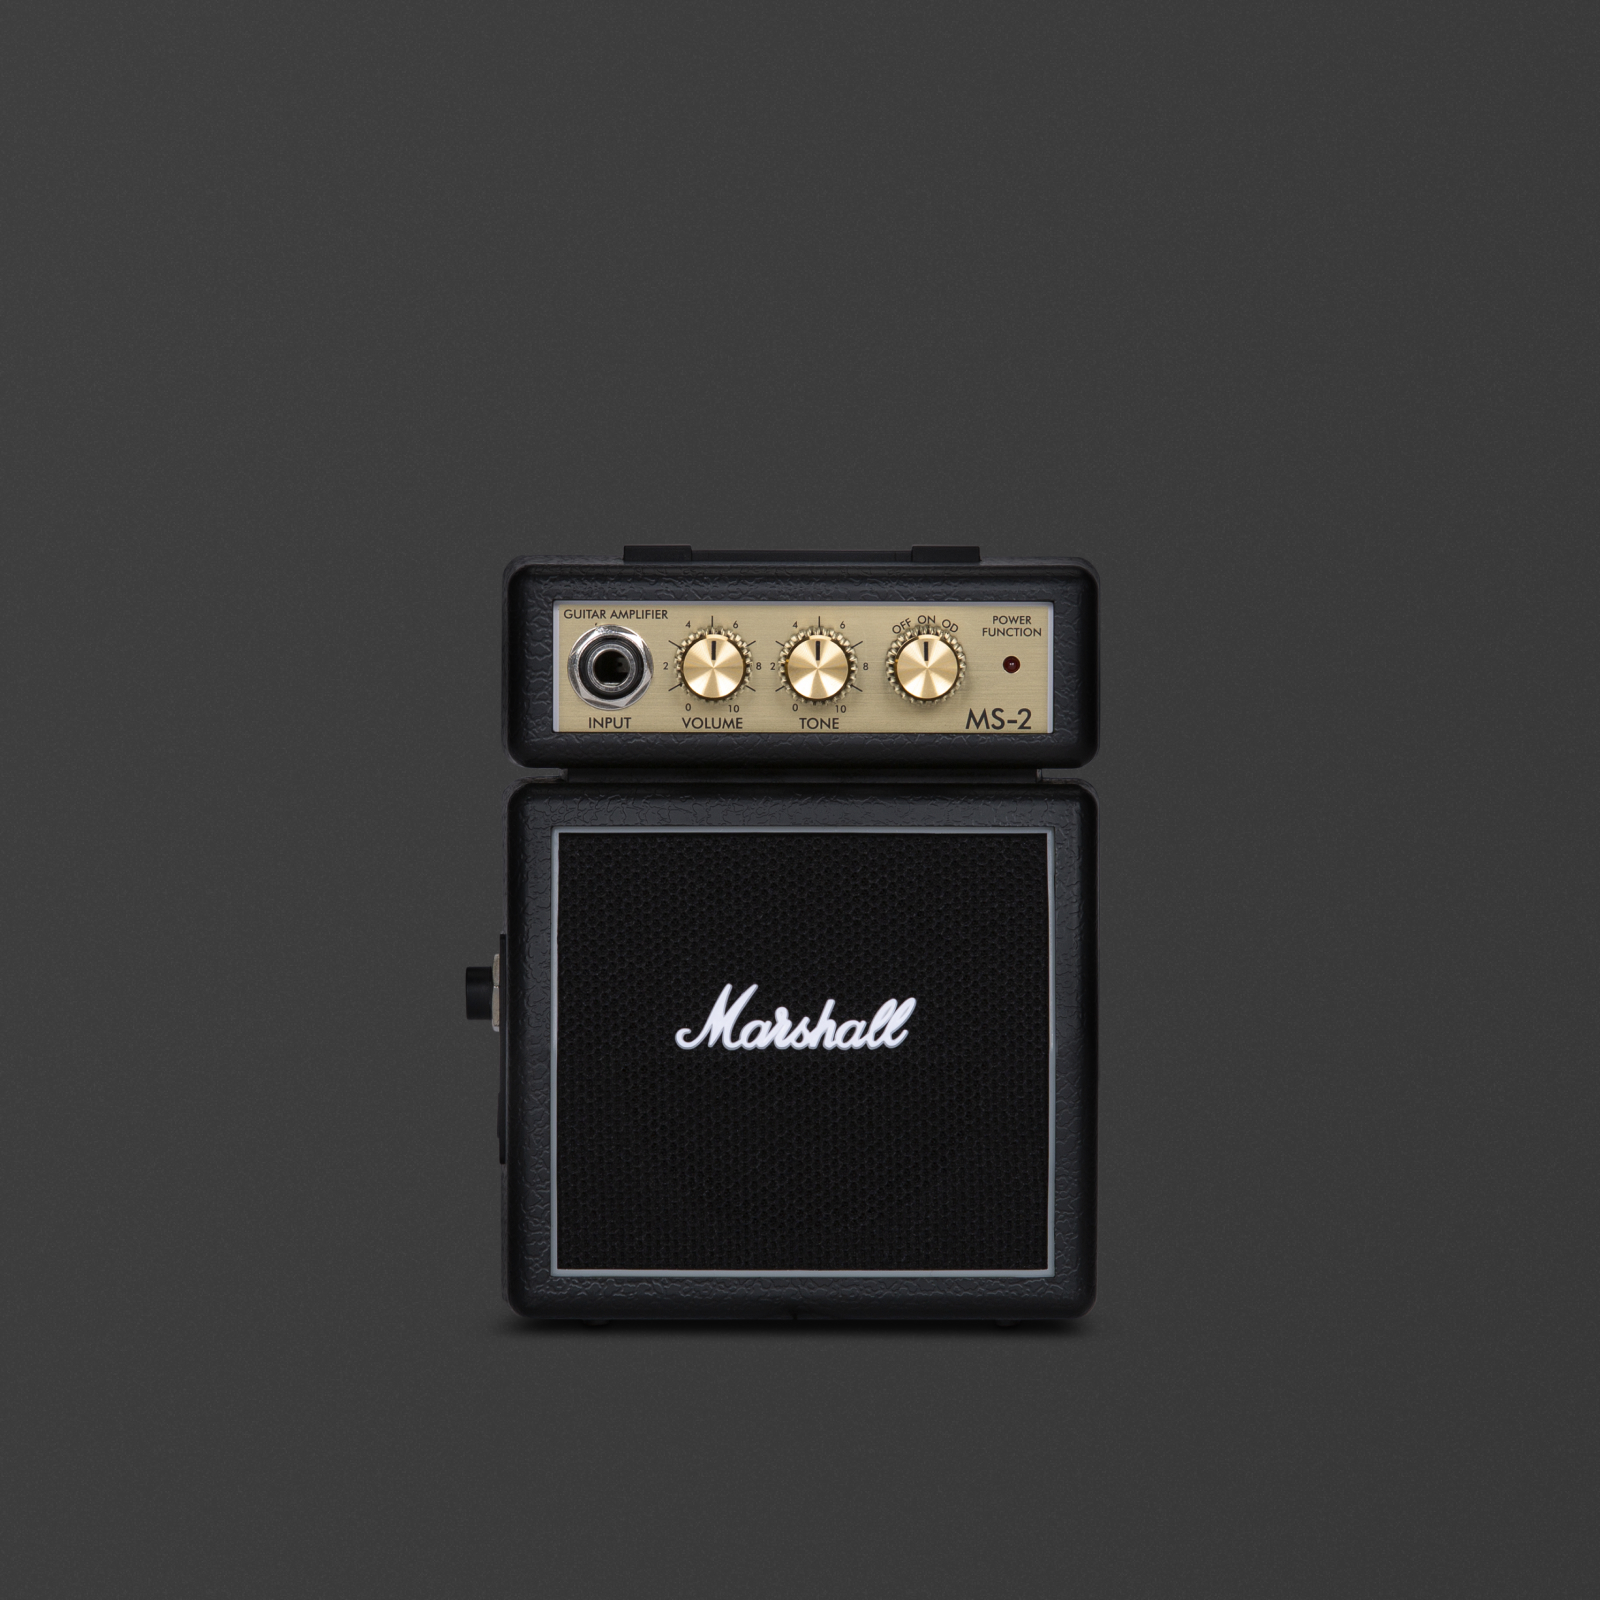 Small microamplifier in black color from Marshall